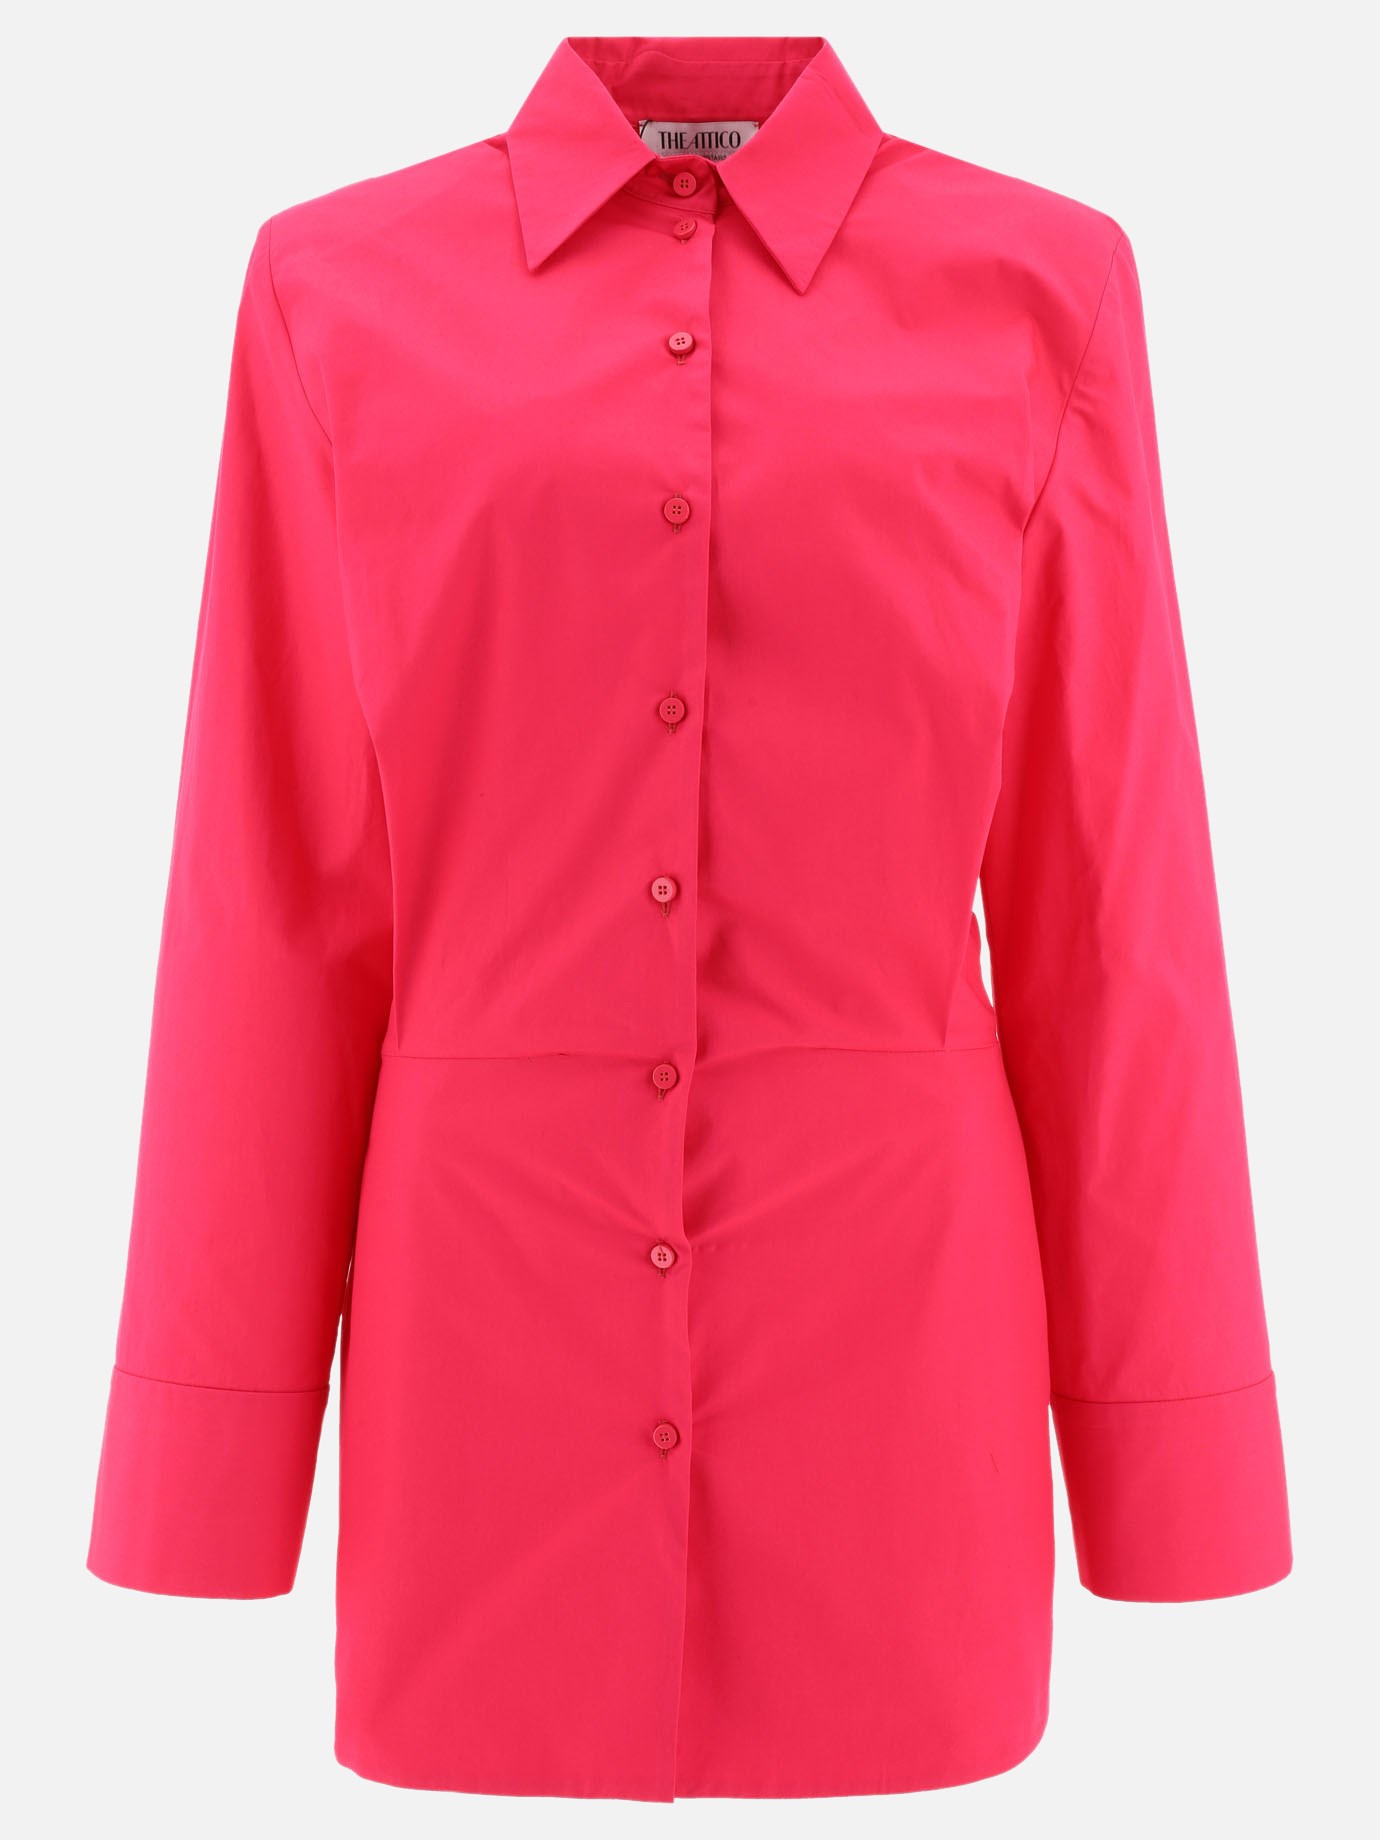 Shirt dress with wide sleevesby The Attico - 4